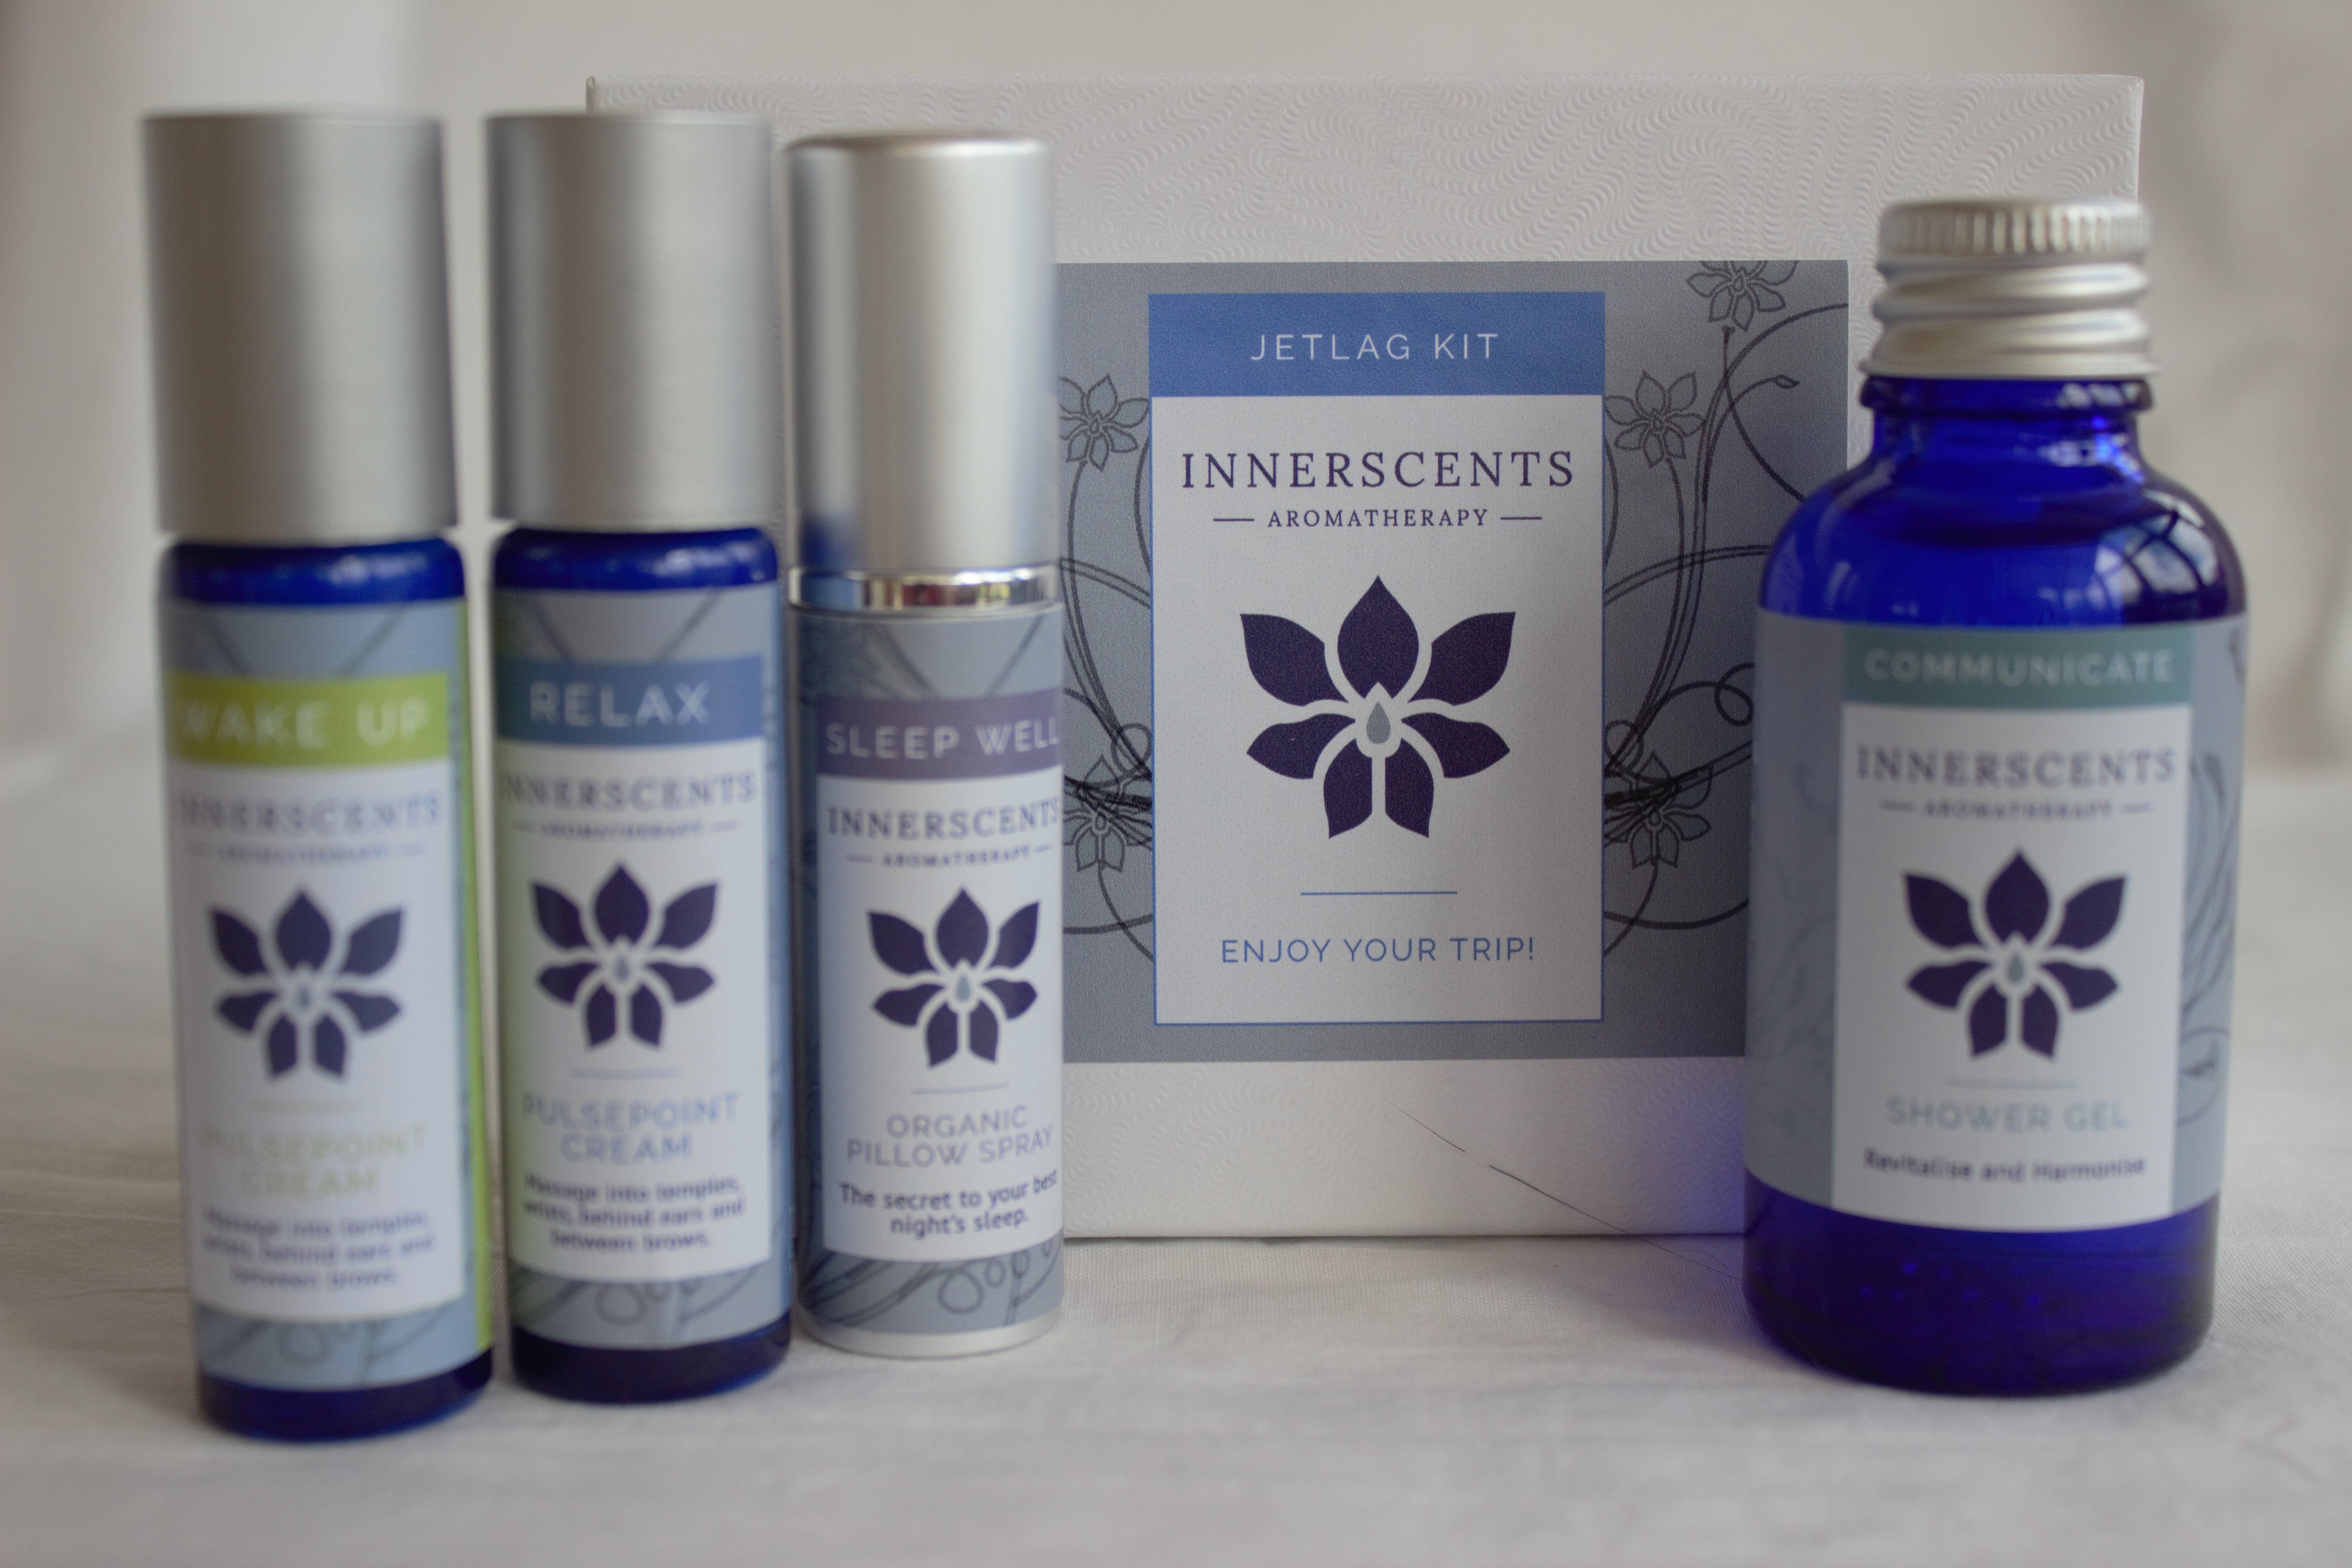 Jetlag Kit with Pure Essential Oils - Innerscents Aromatherapy